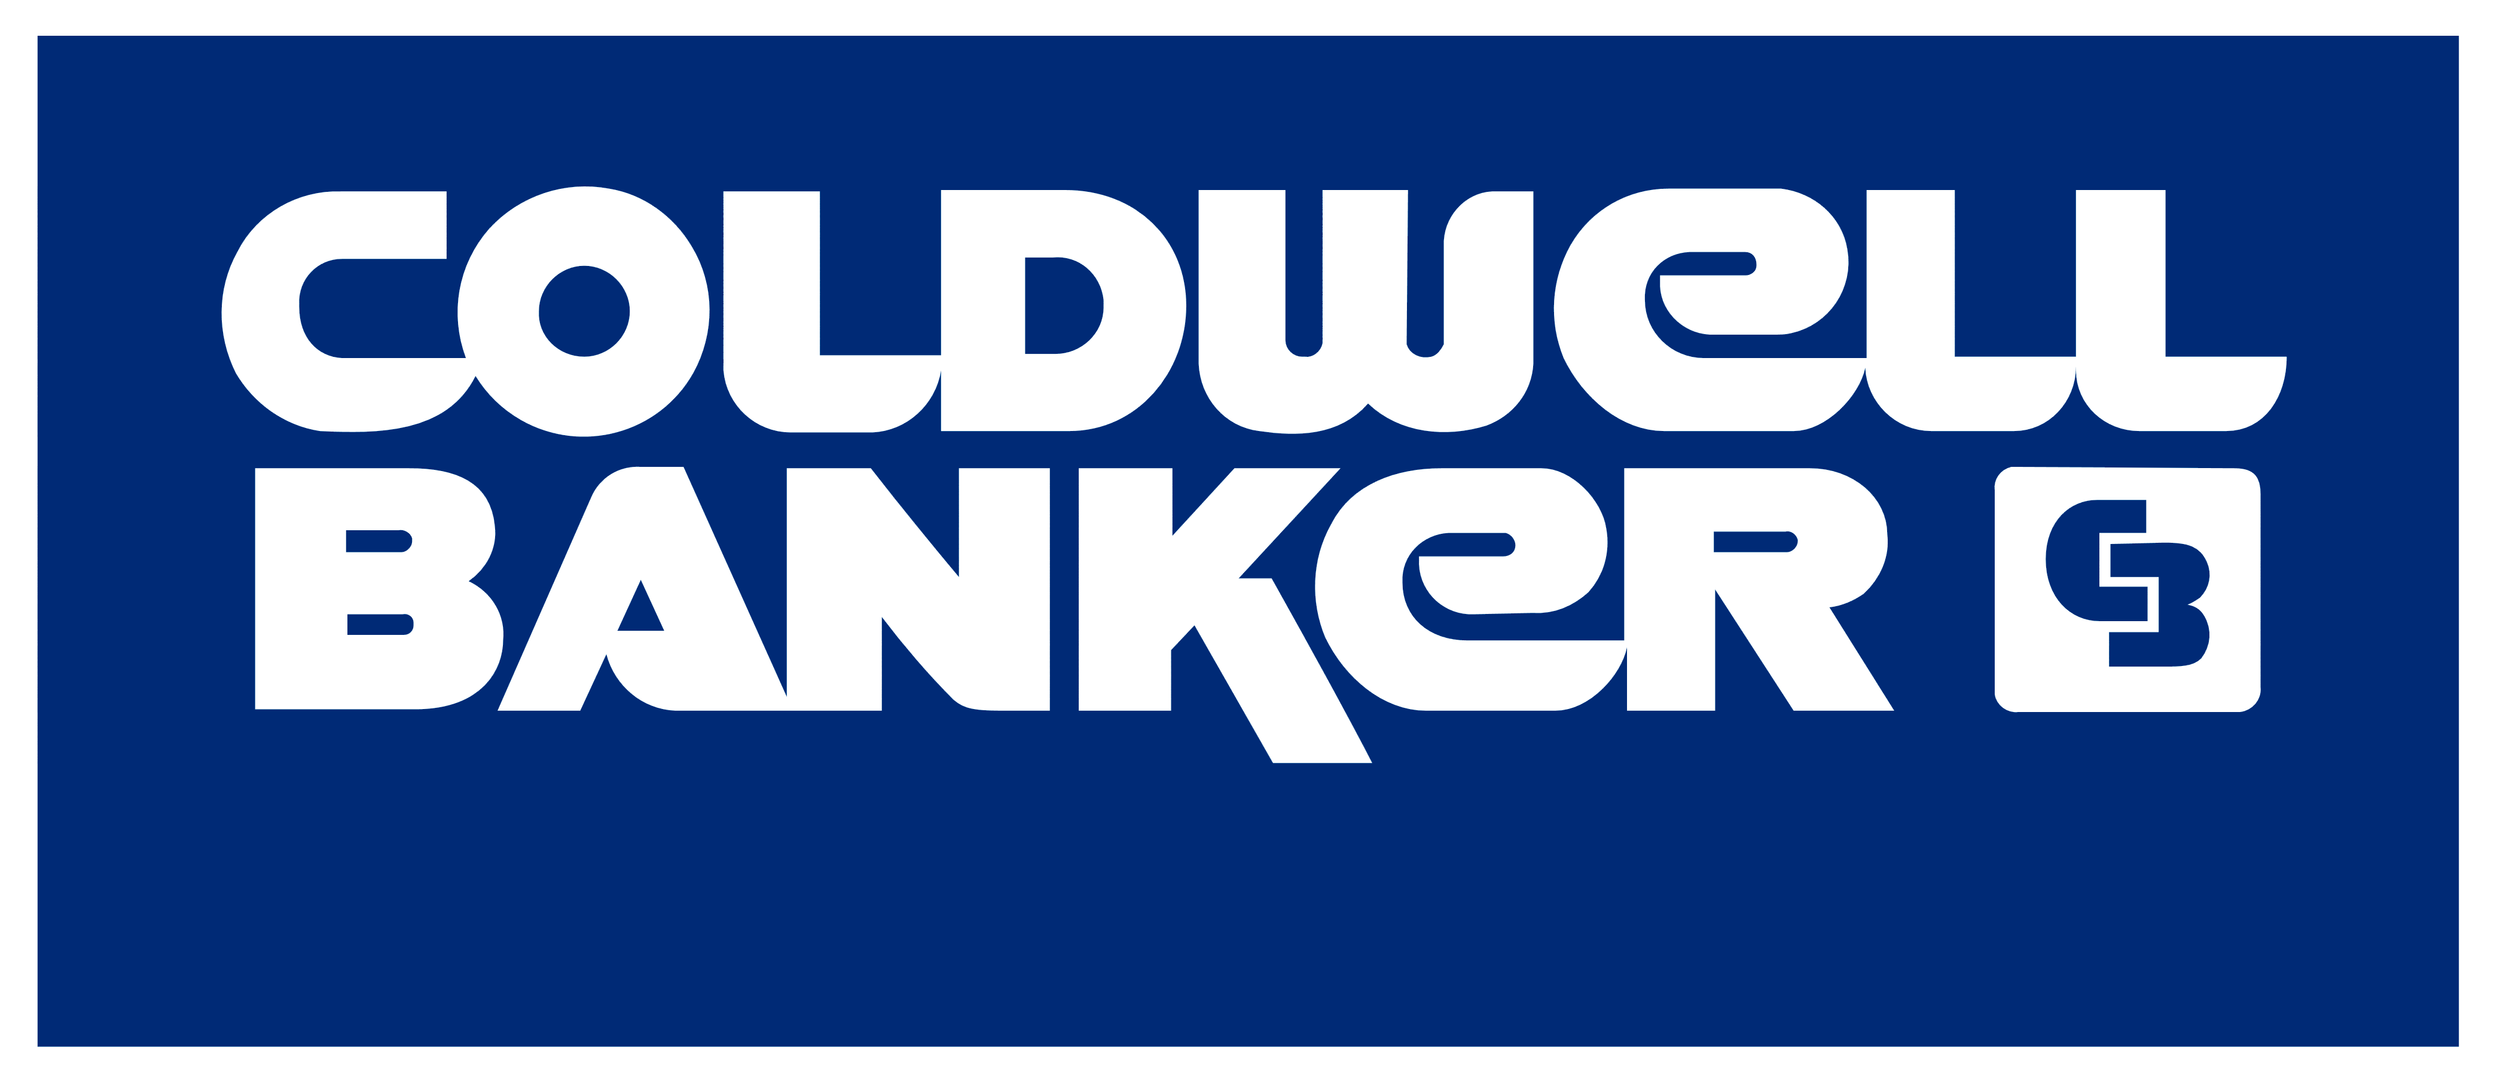 Coldwell_Banker_logo.png